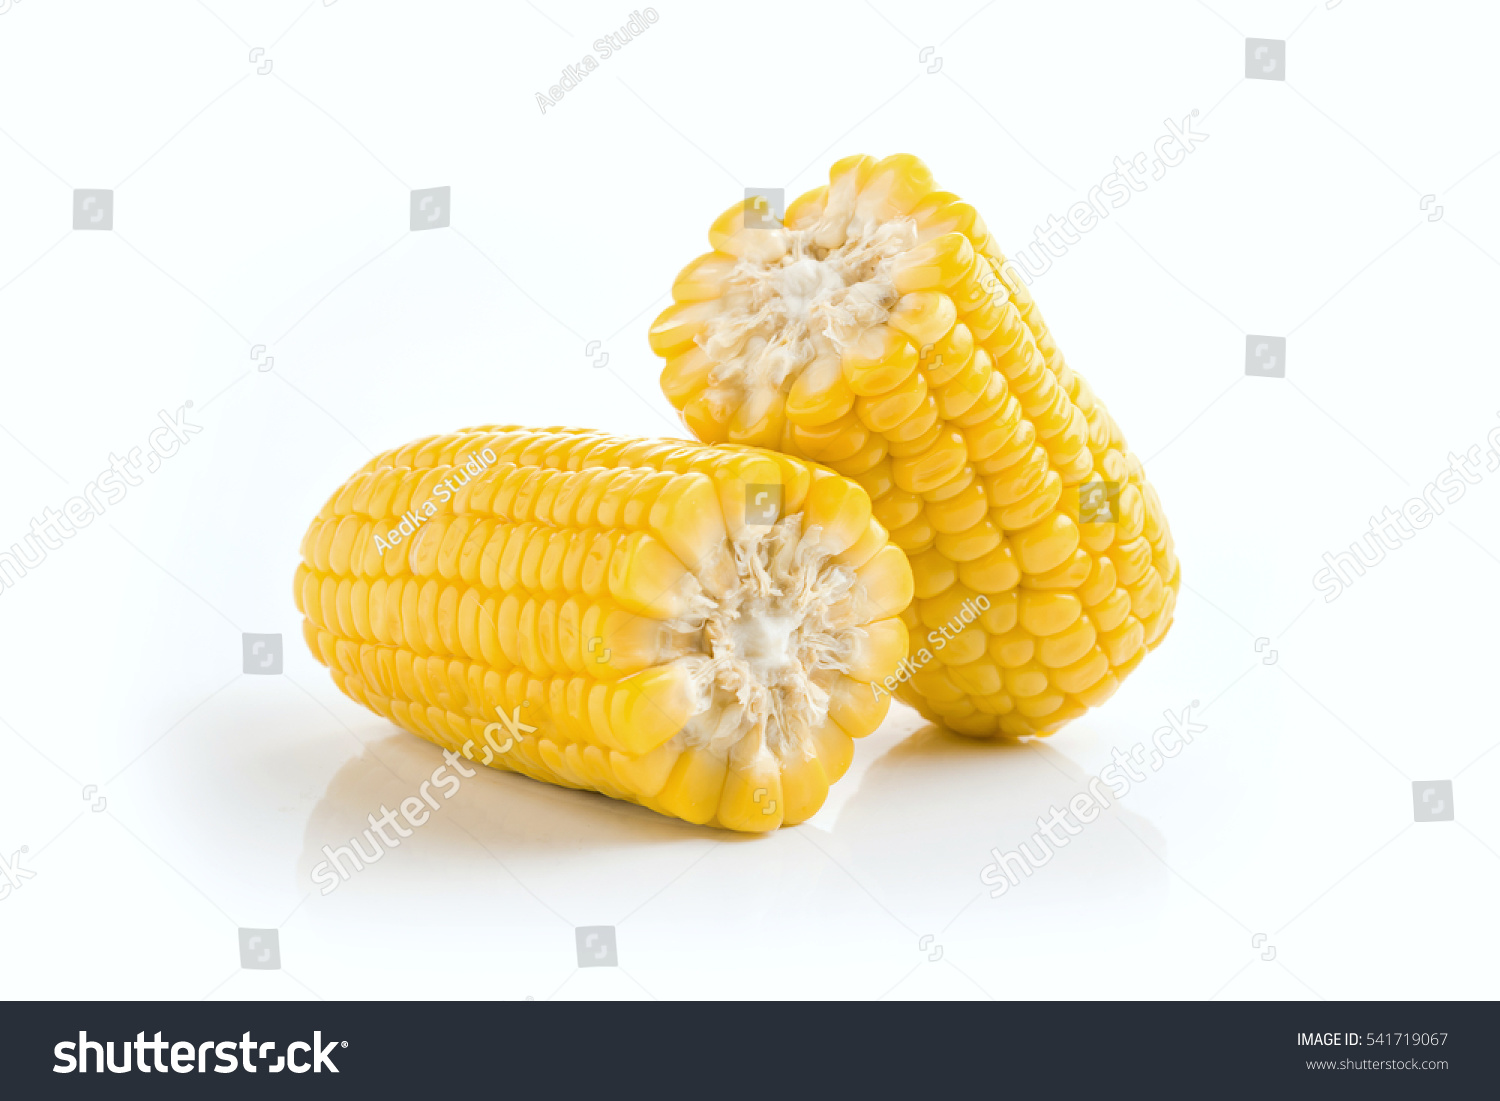 ears of Sweet corn isolated on white background #541719067